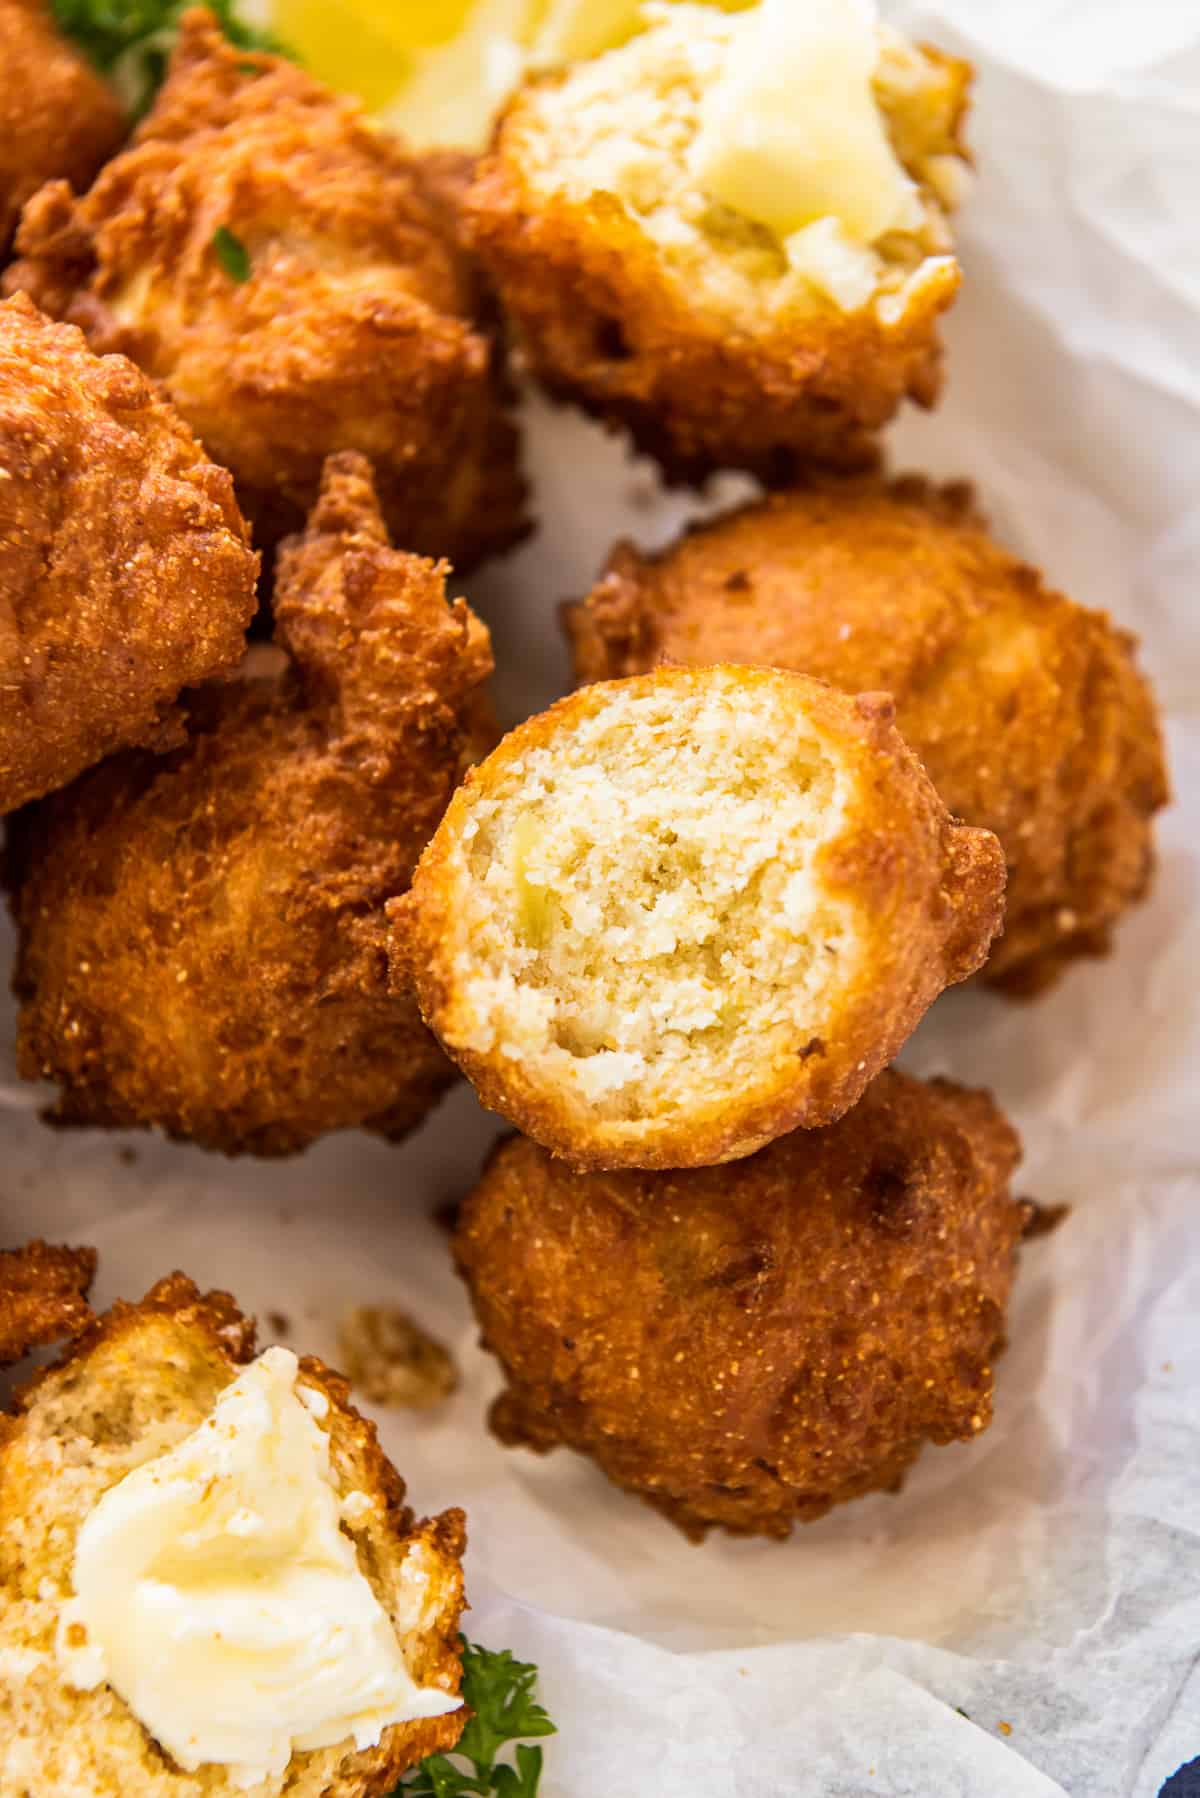 Southern Hushpuppies - Home. Made. Interest.